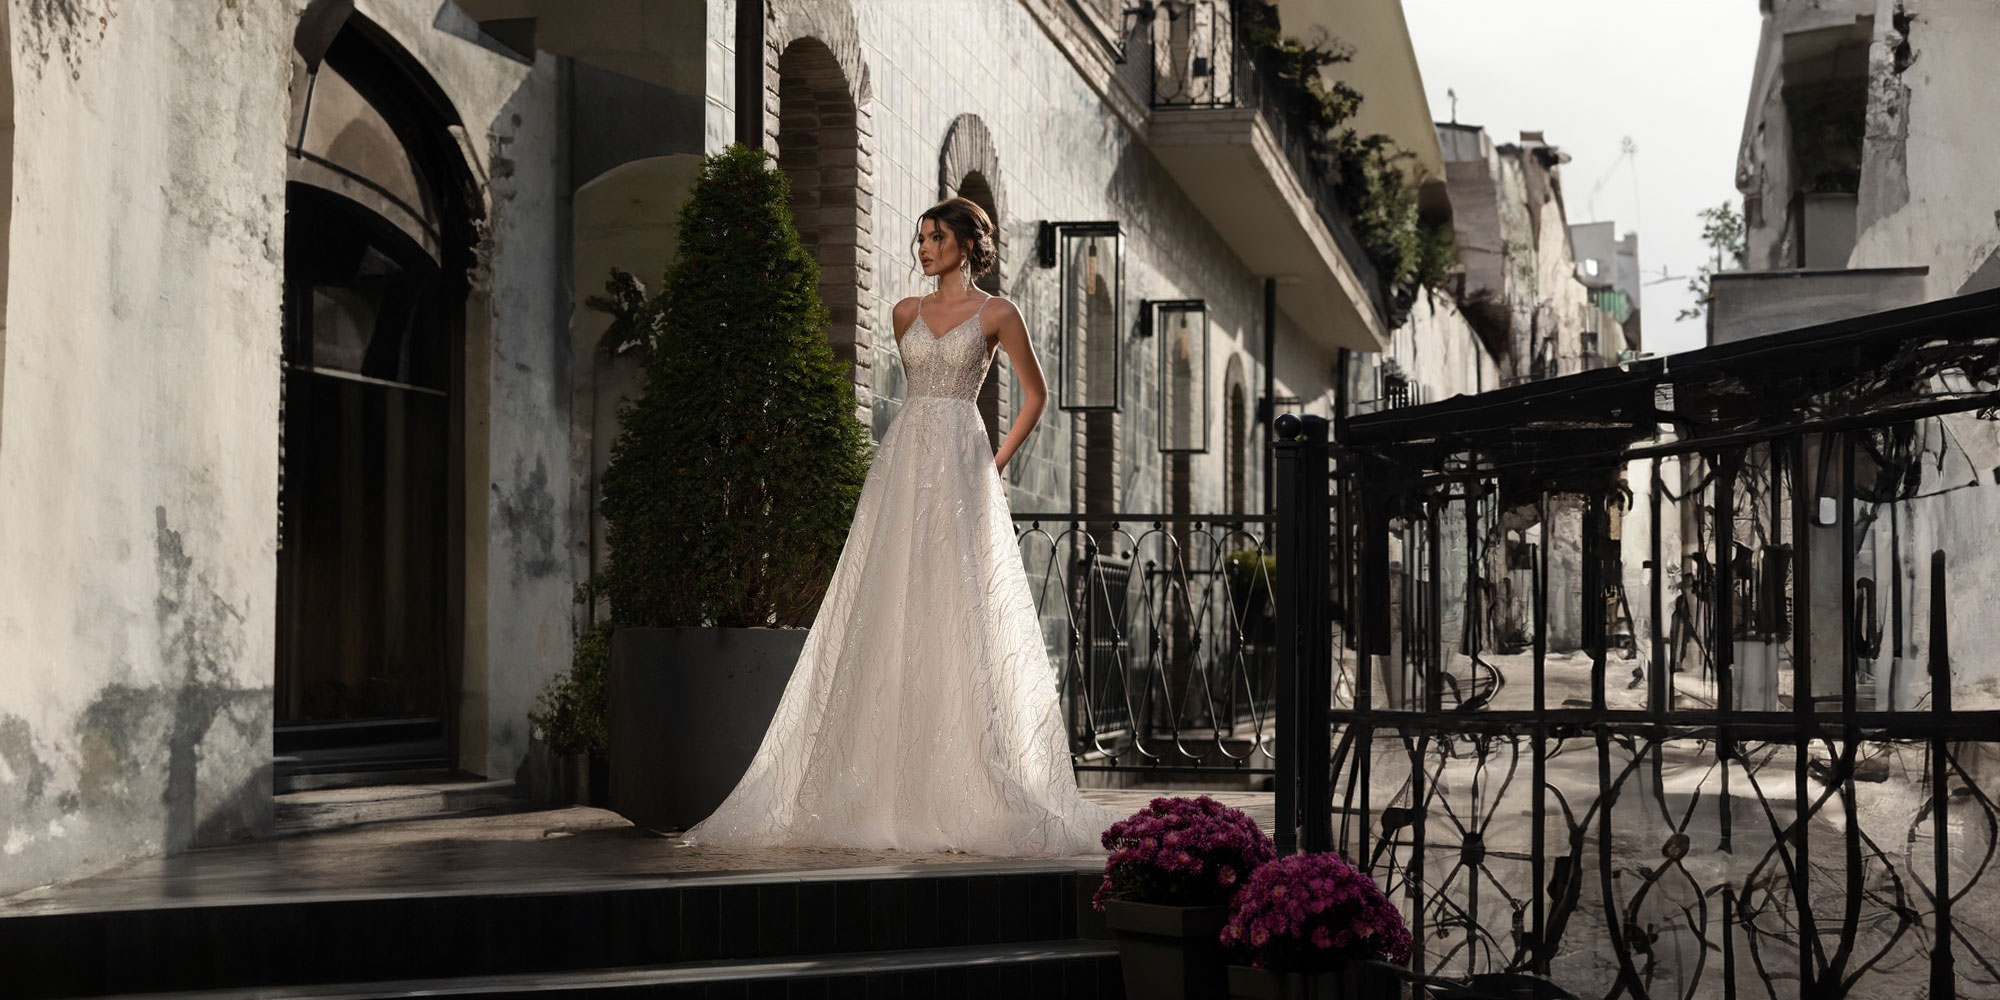 Embracing tradition with classic wedding dress styles-Mont Elisa